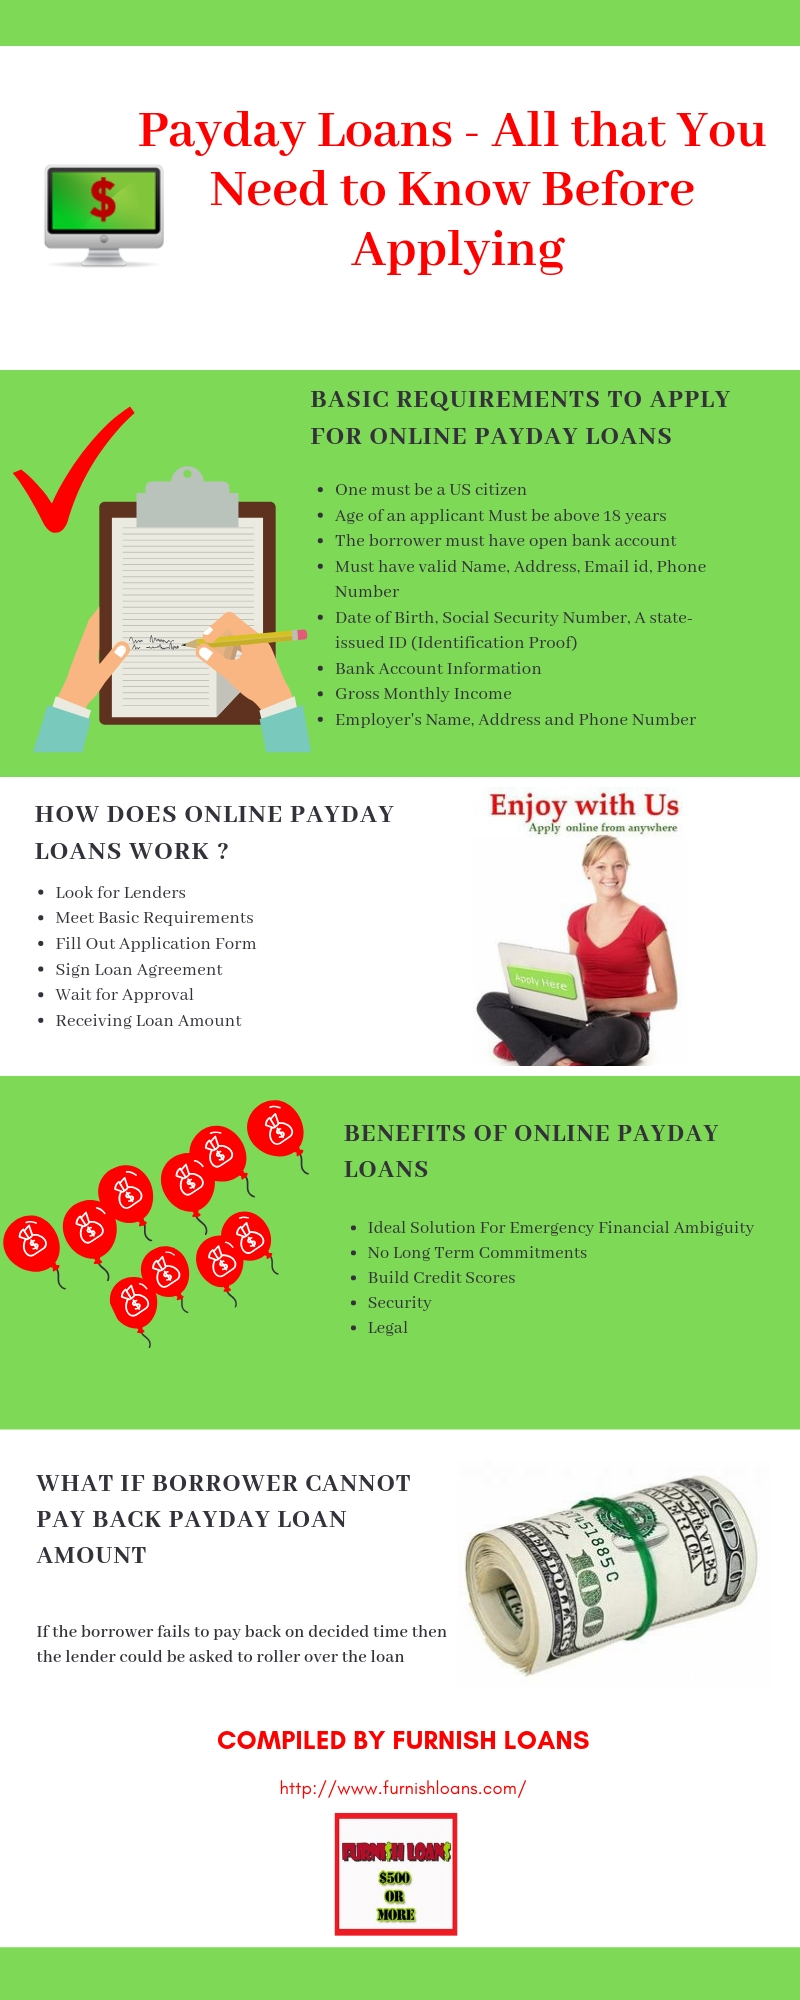 Payday Loans - All that You Need to Know Before Applying